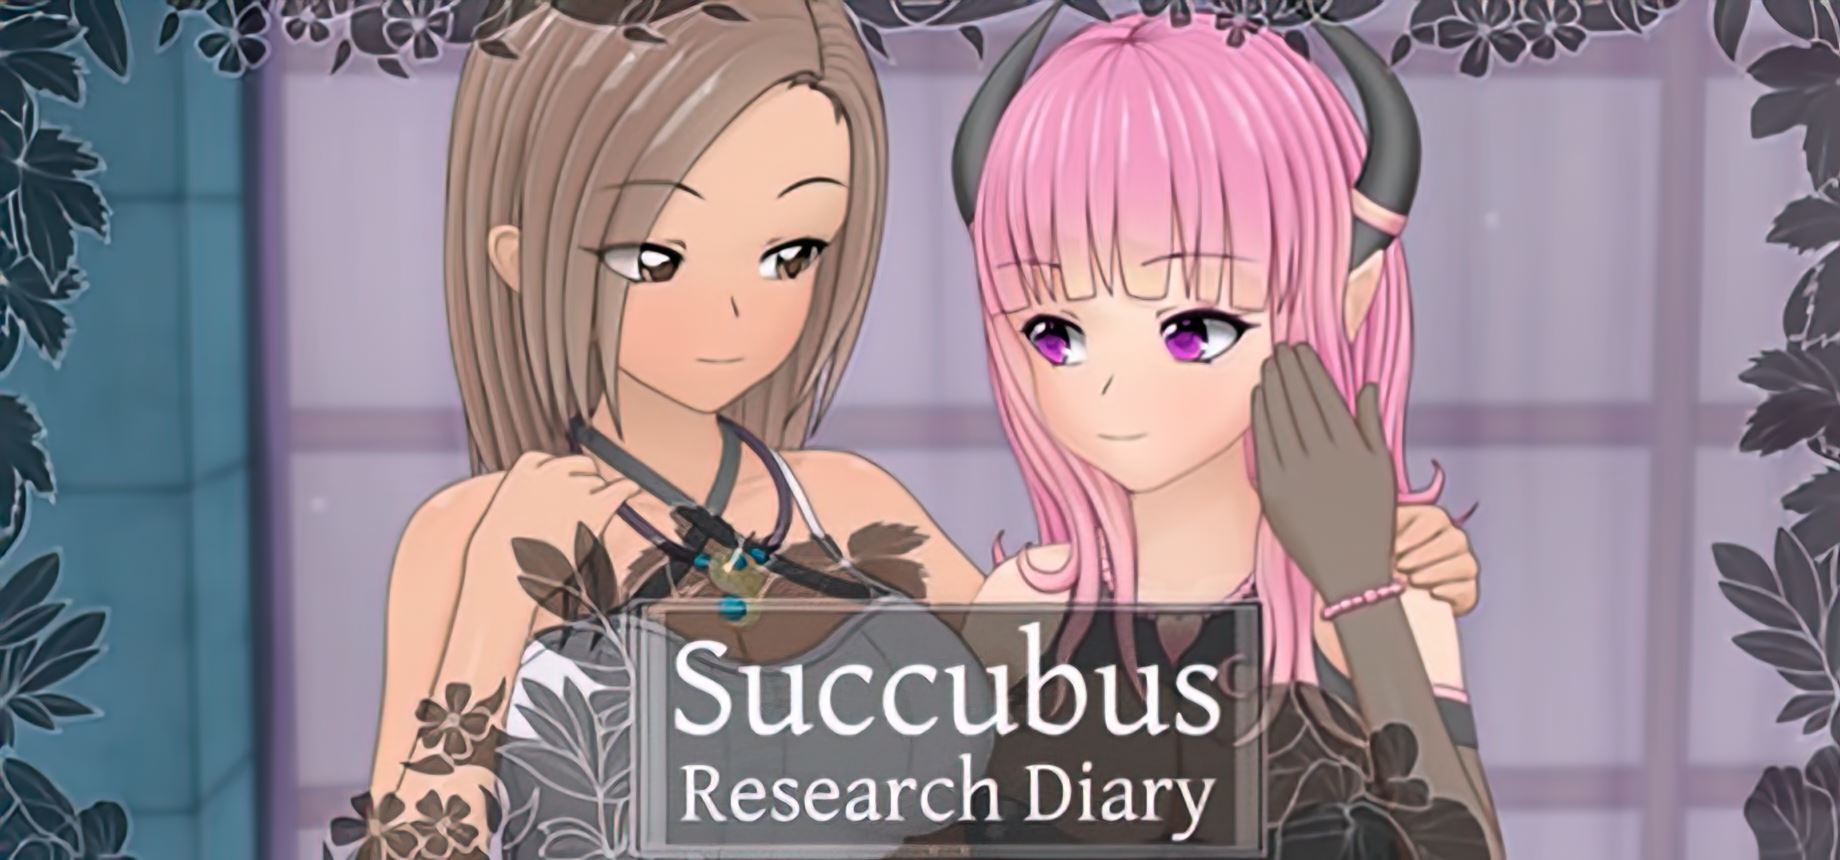 Succubus Research Diary porn xxx game download cover